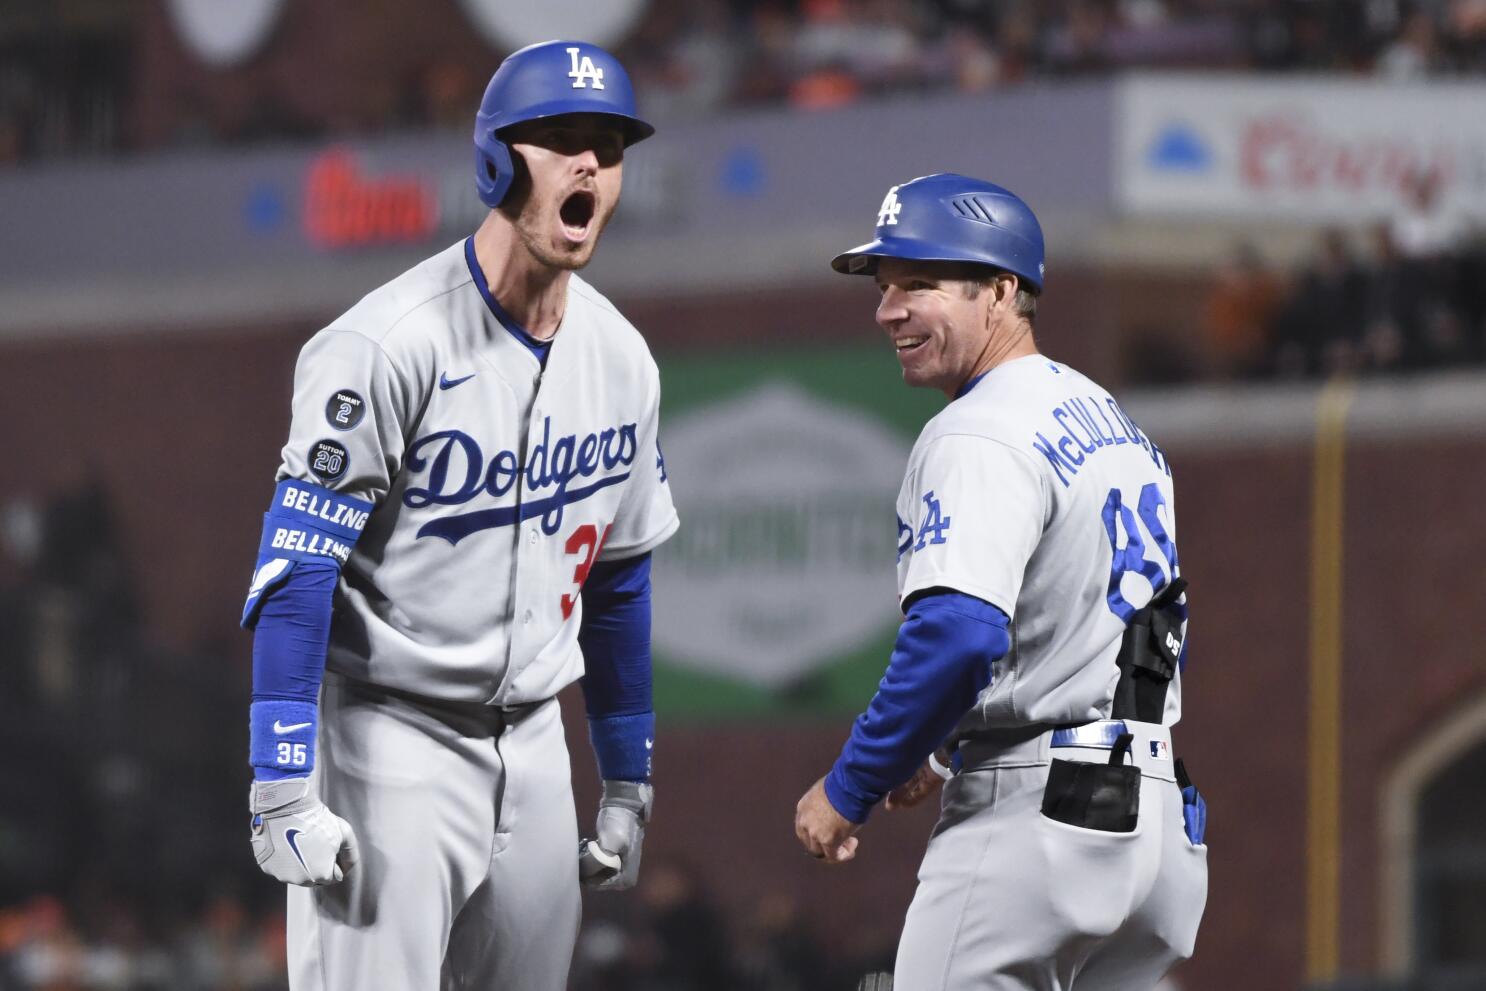 Dodgers: Cody Bellinger and Corey Seager memes own Twitter again